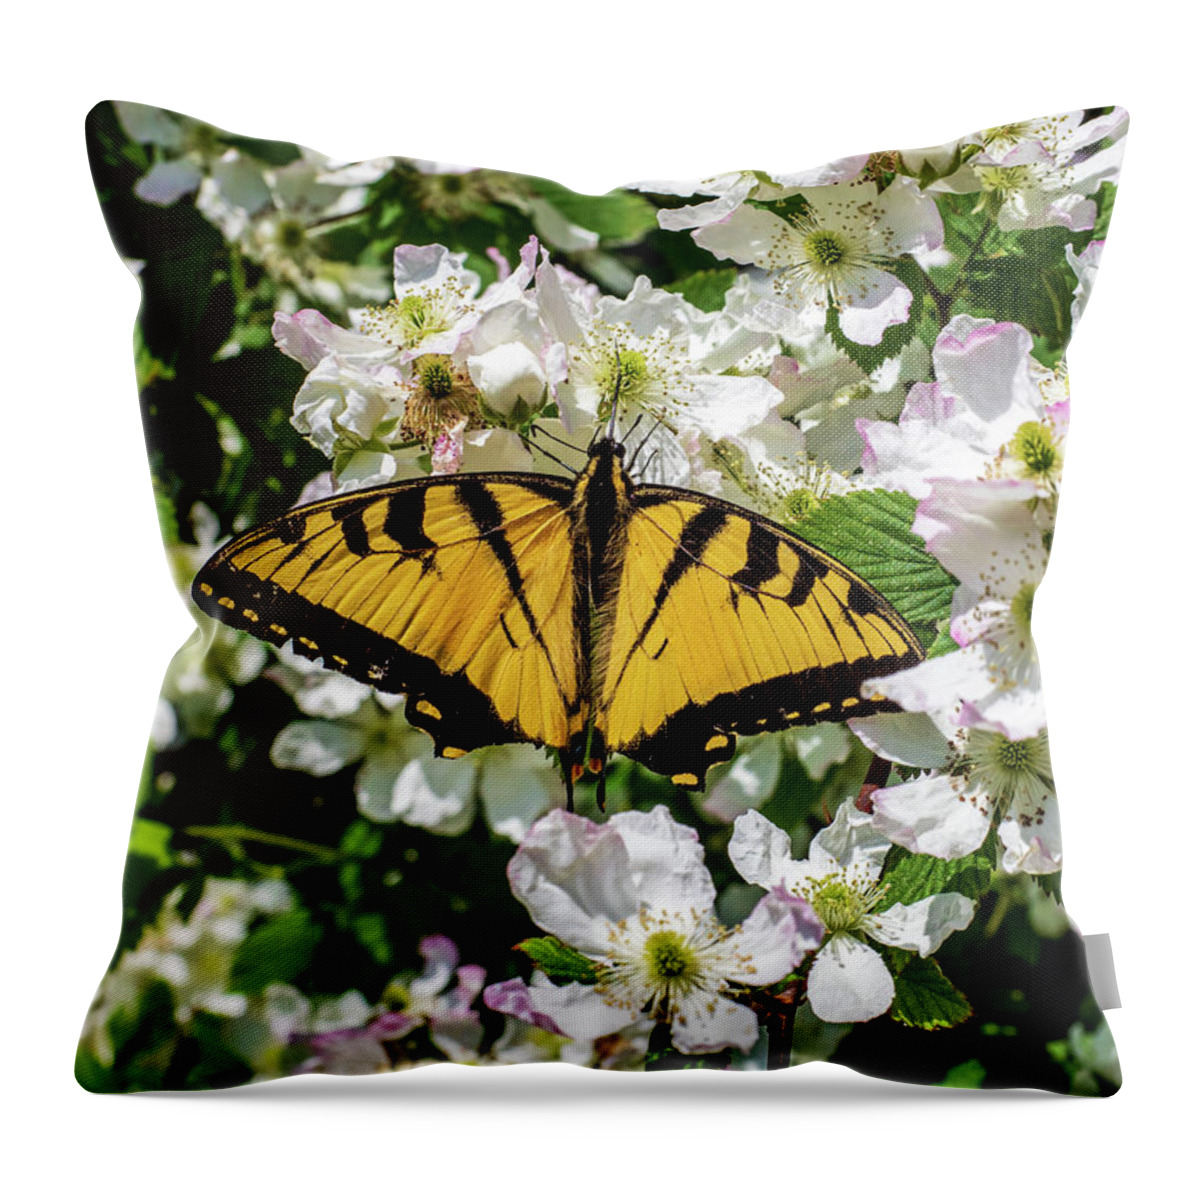 Animals Throw Pillow featuring the photograph Monarch Butterfly by Louis Dallara